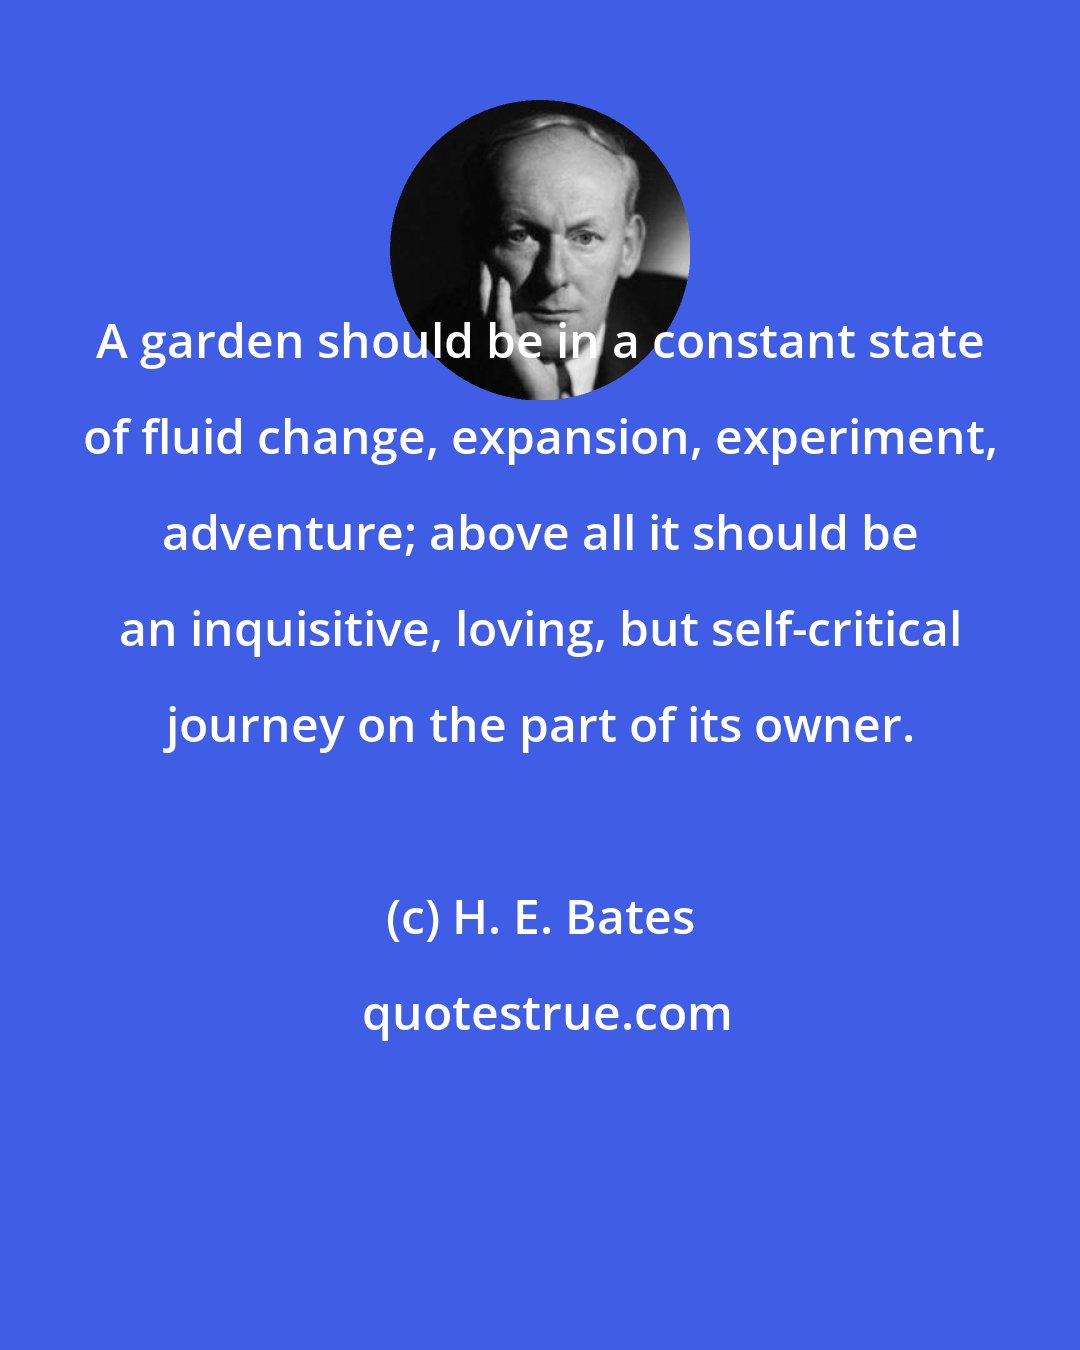 H. E. Bates: A garden should be in a constant state of fluid change, expansion, experiment, adventure; above all it should be an inquisitive, loving, but self-critical journey on the part of its owner.